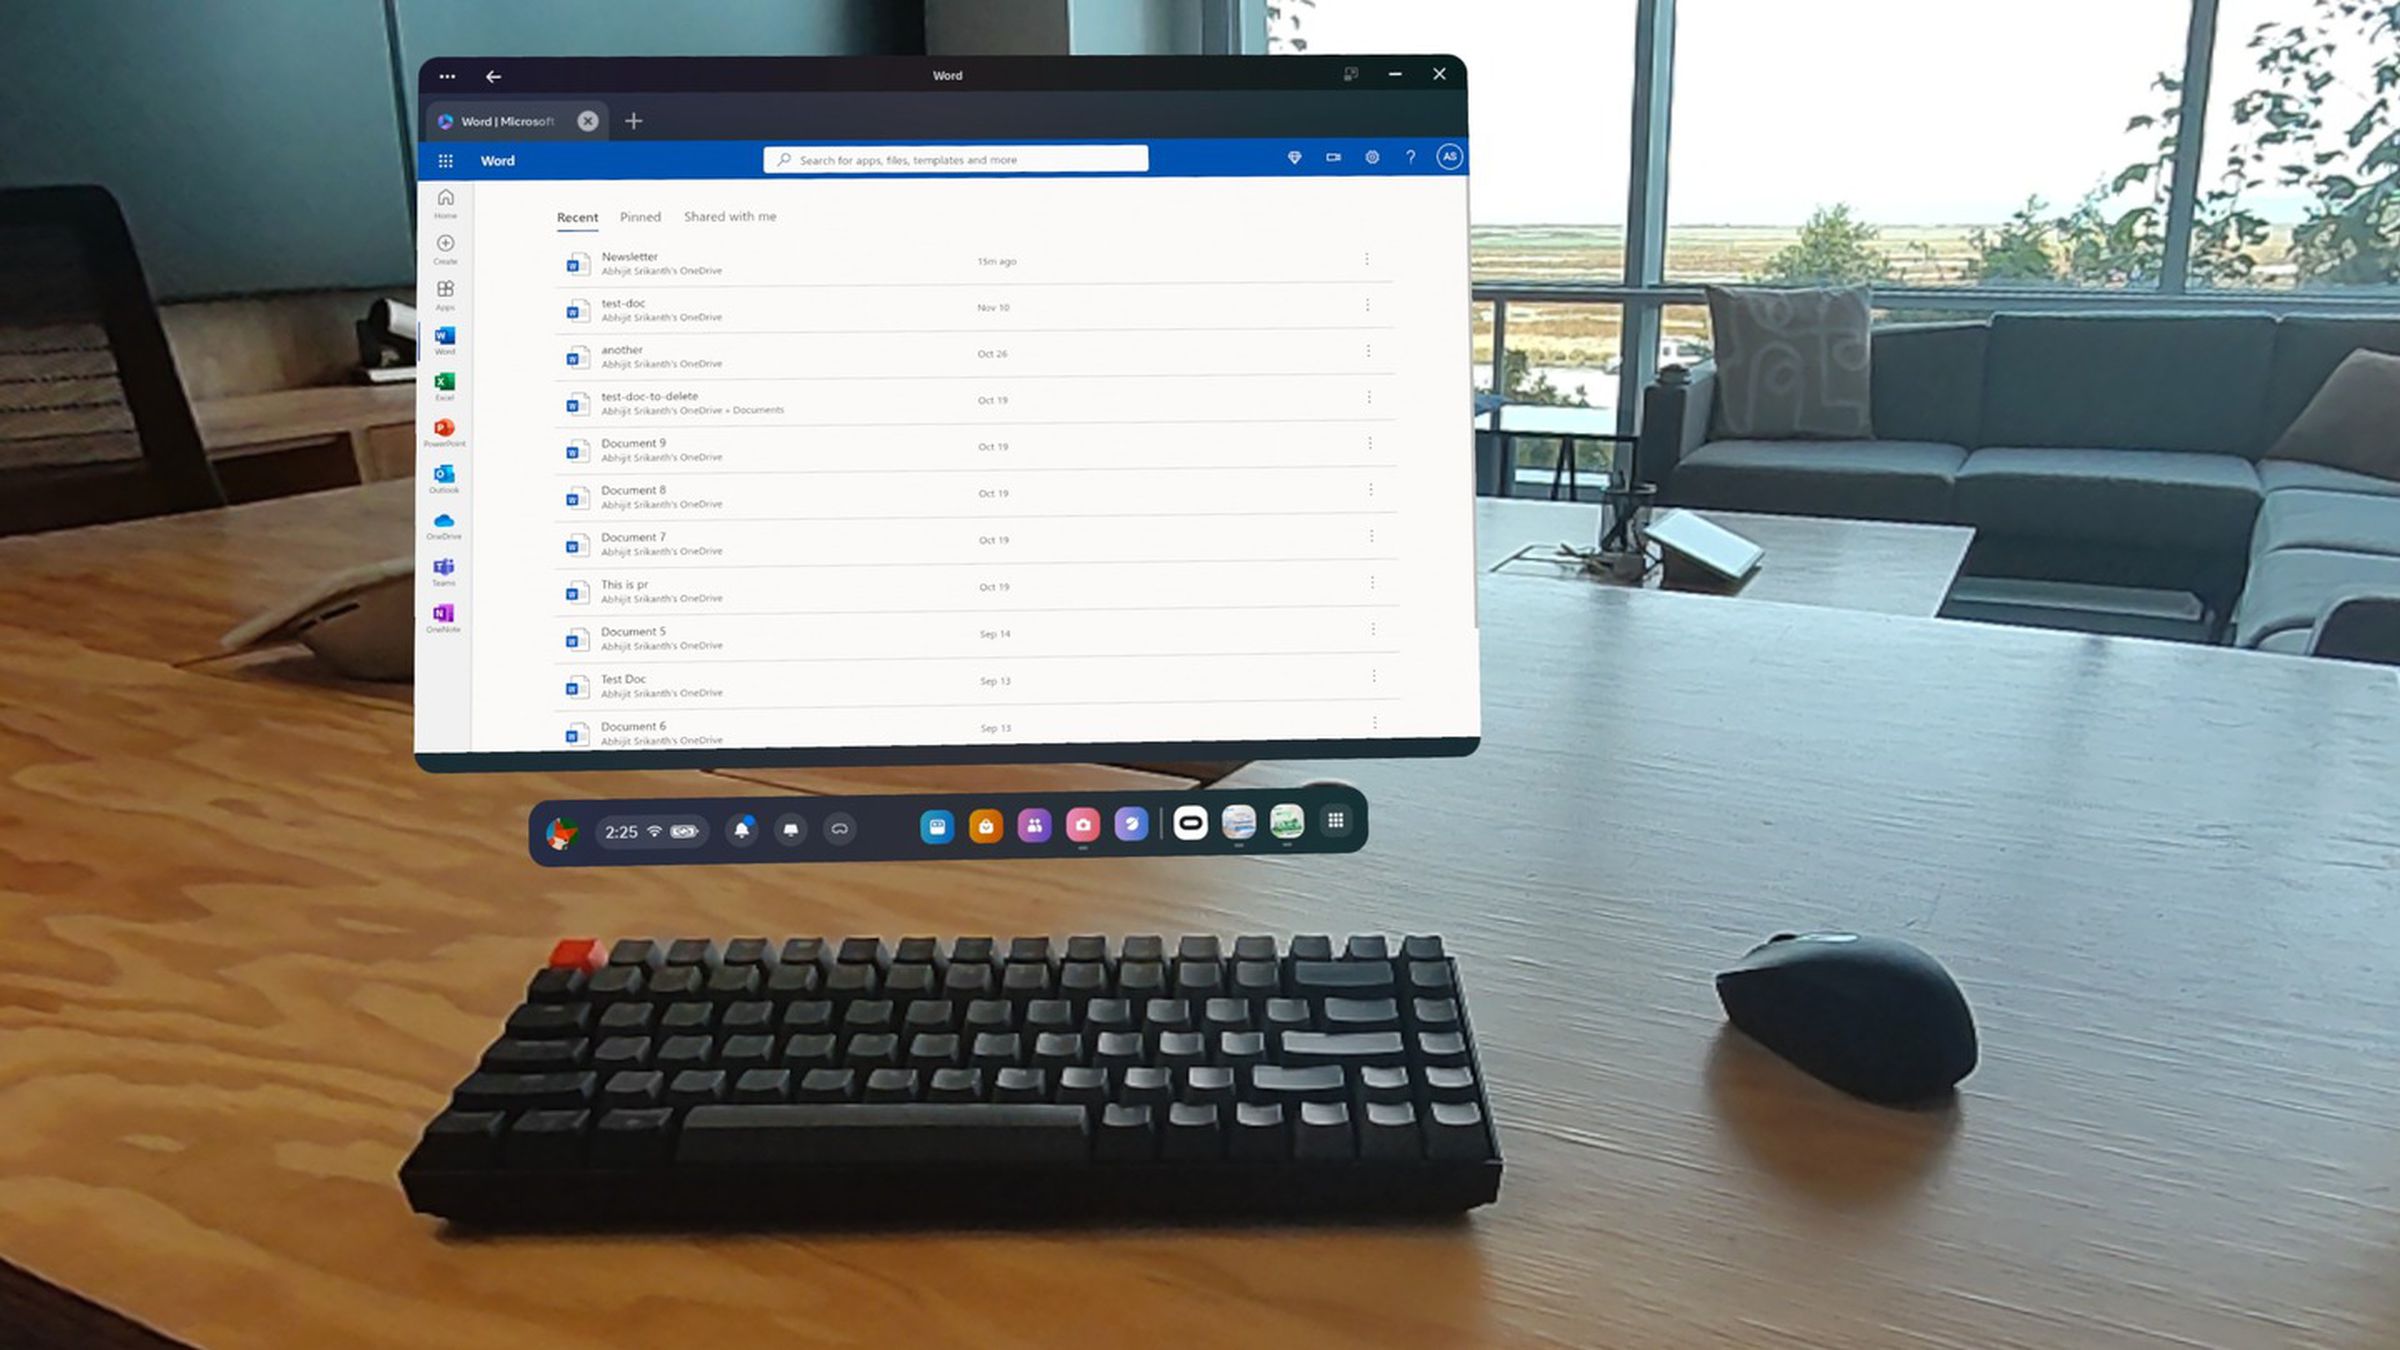 A photo showing a Microsoft Word window in VR over a keyboard in a conference room.